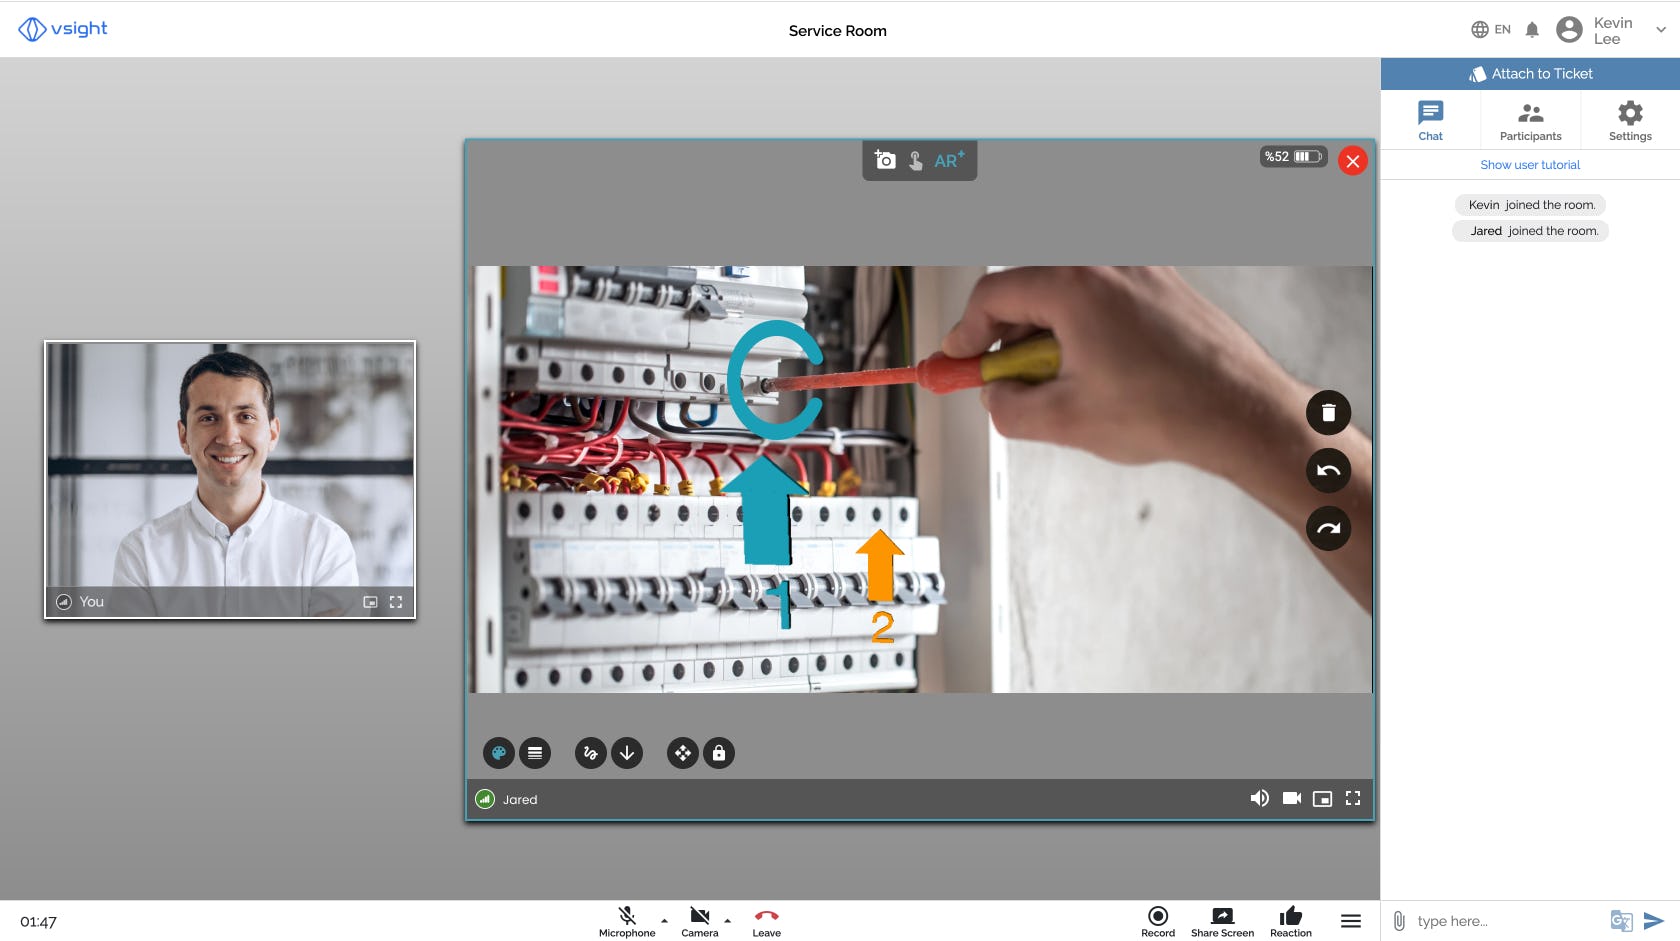 VSight Remote Software - Annotate with Augmented Reality in live video stream.